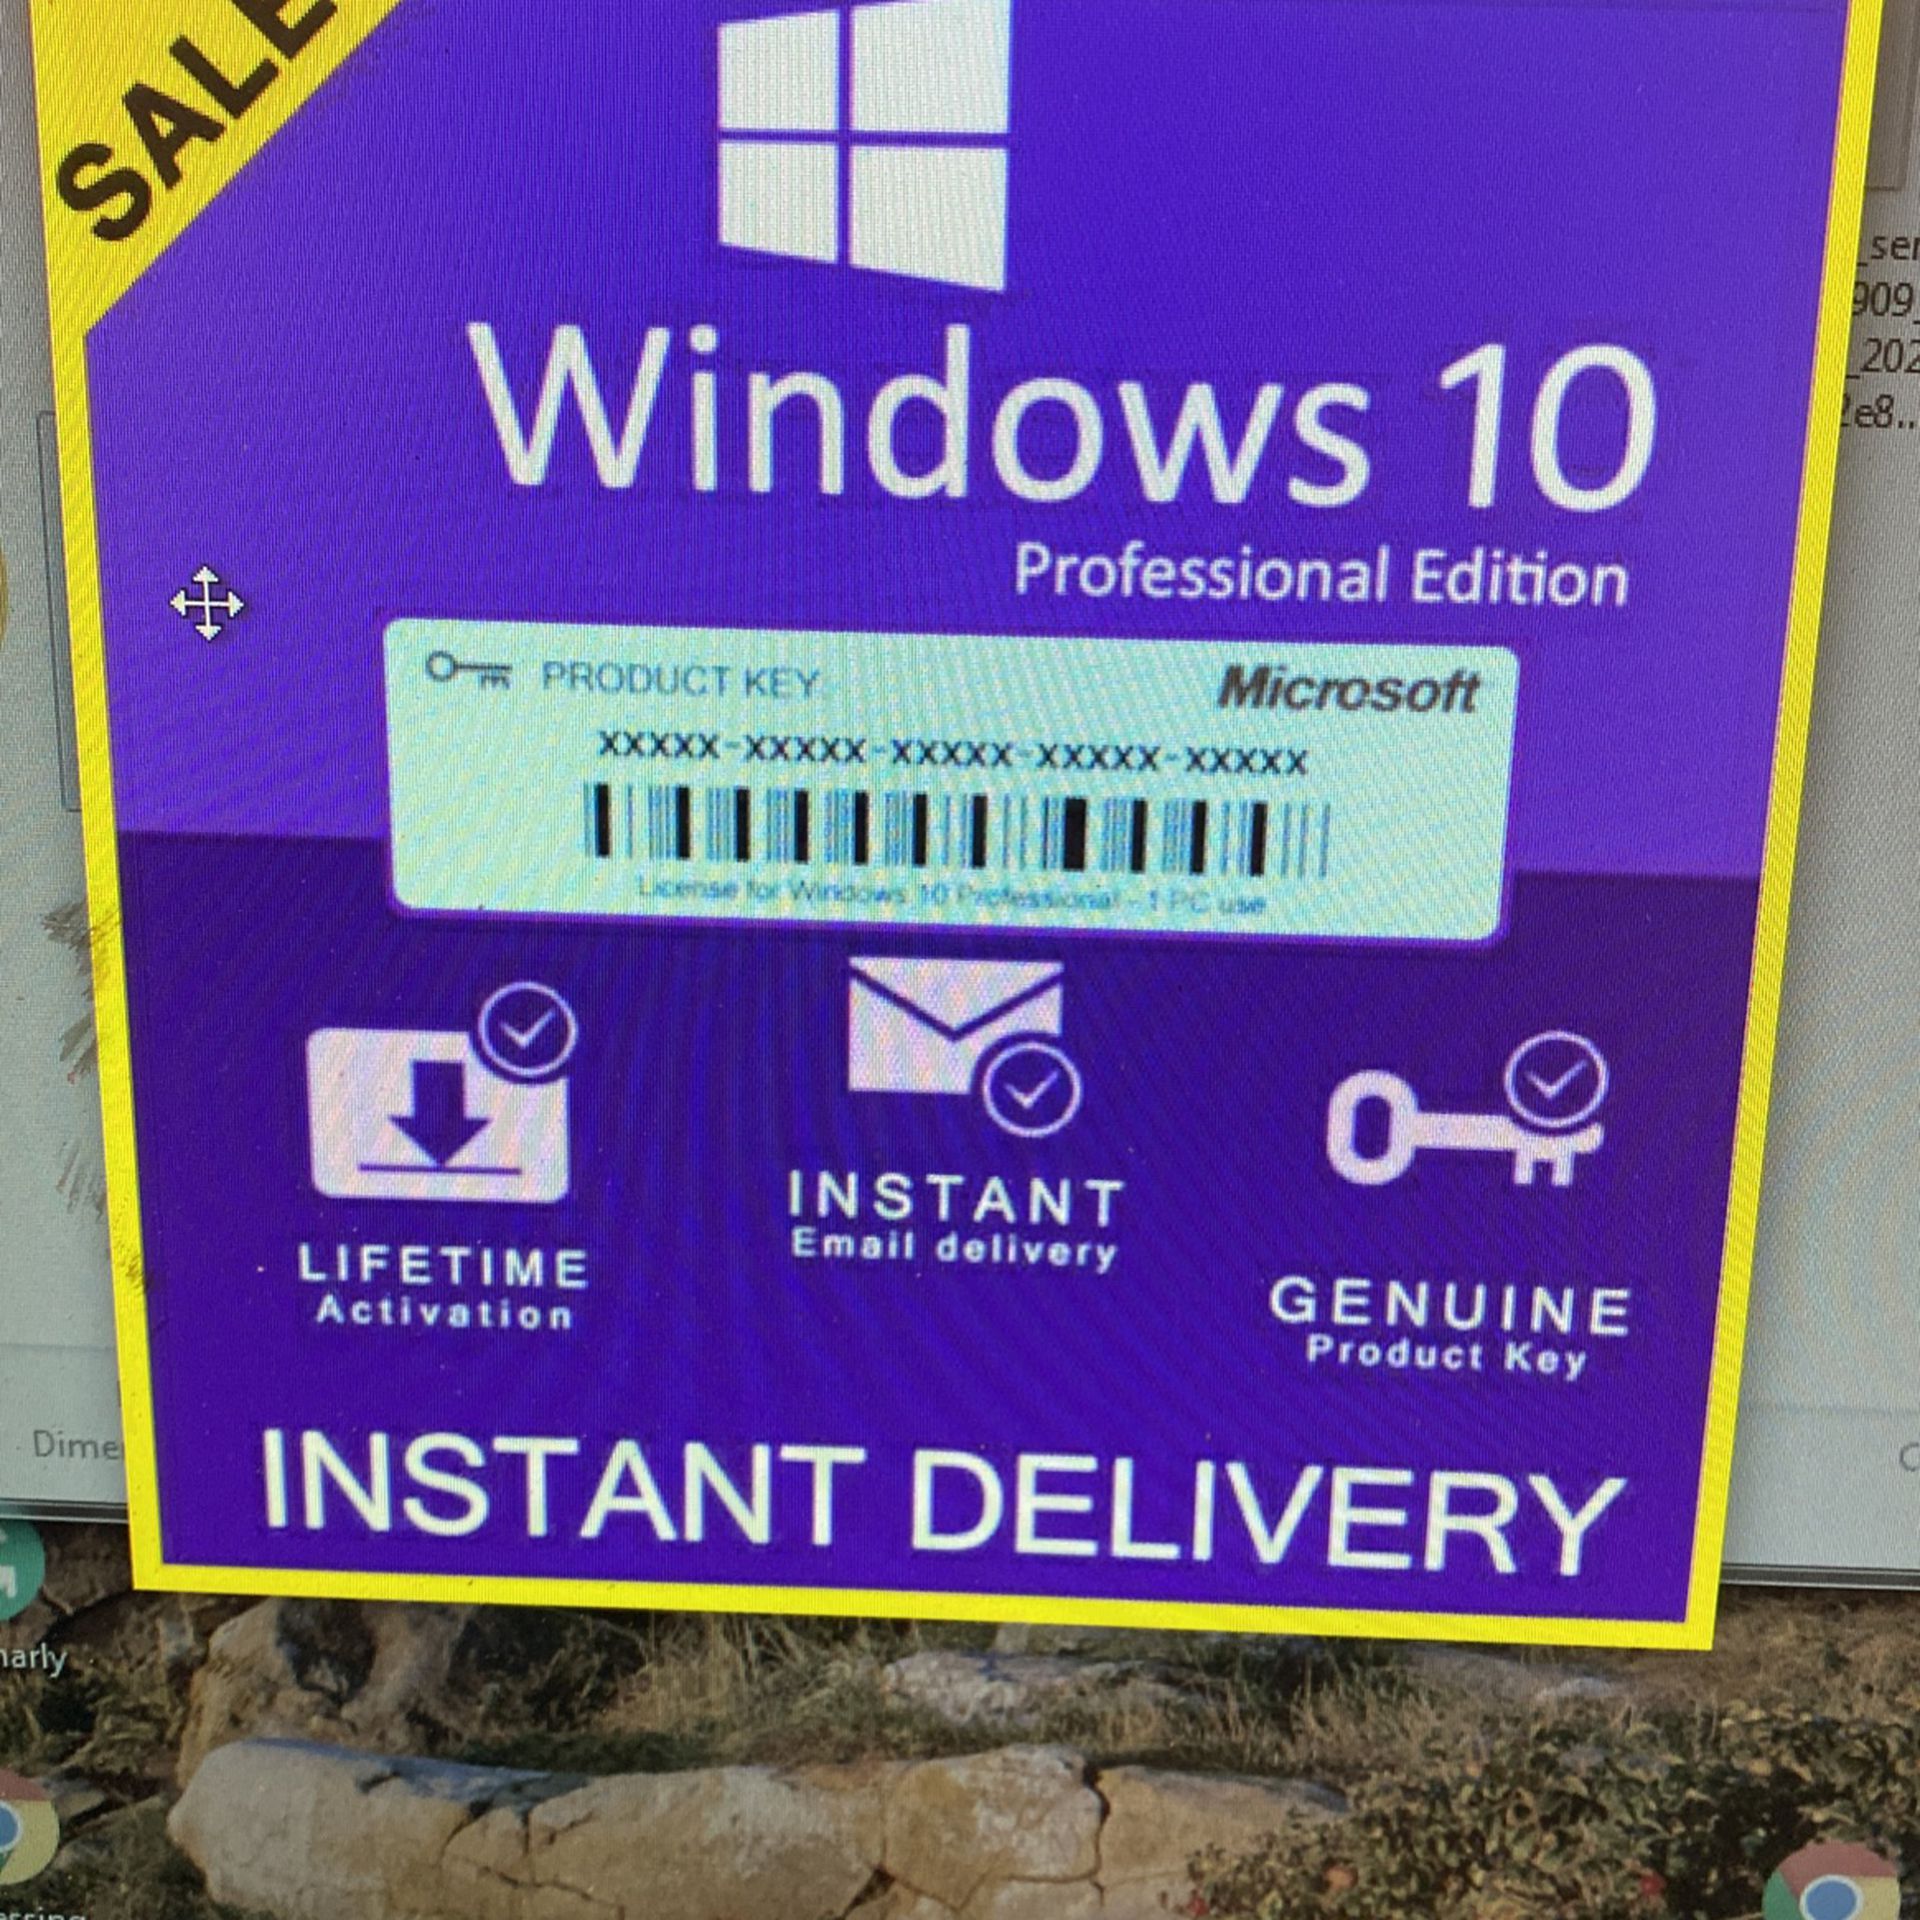 Window 10 Pro License Key Instant Email Delivery